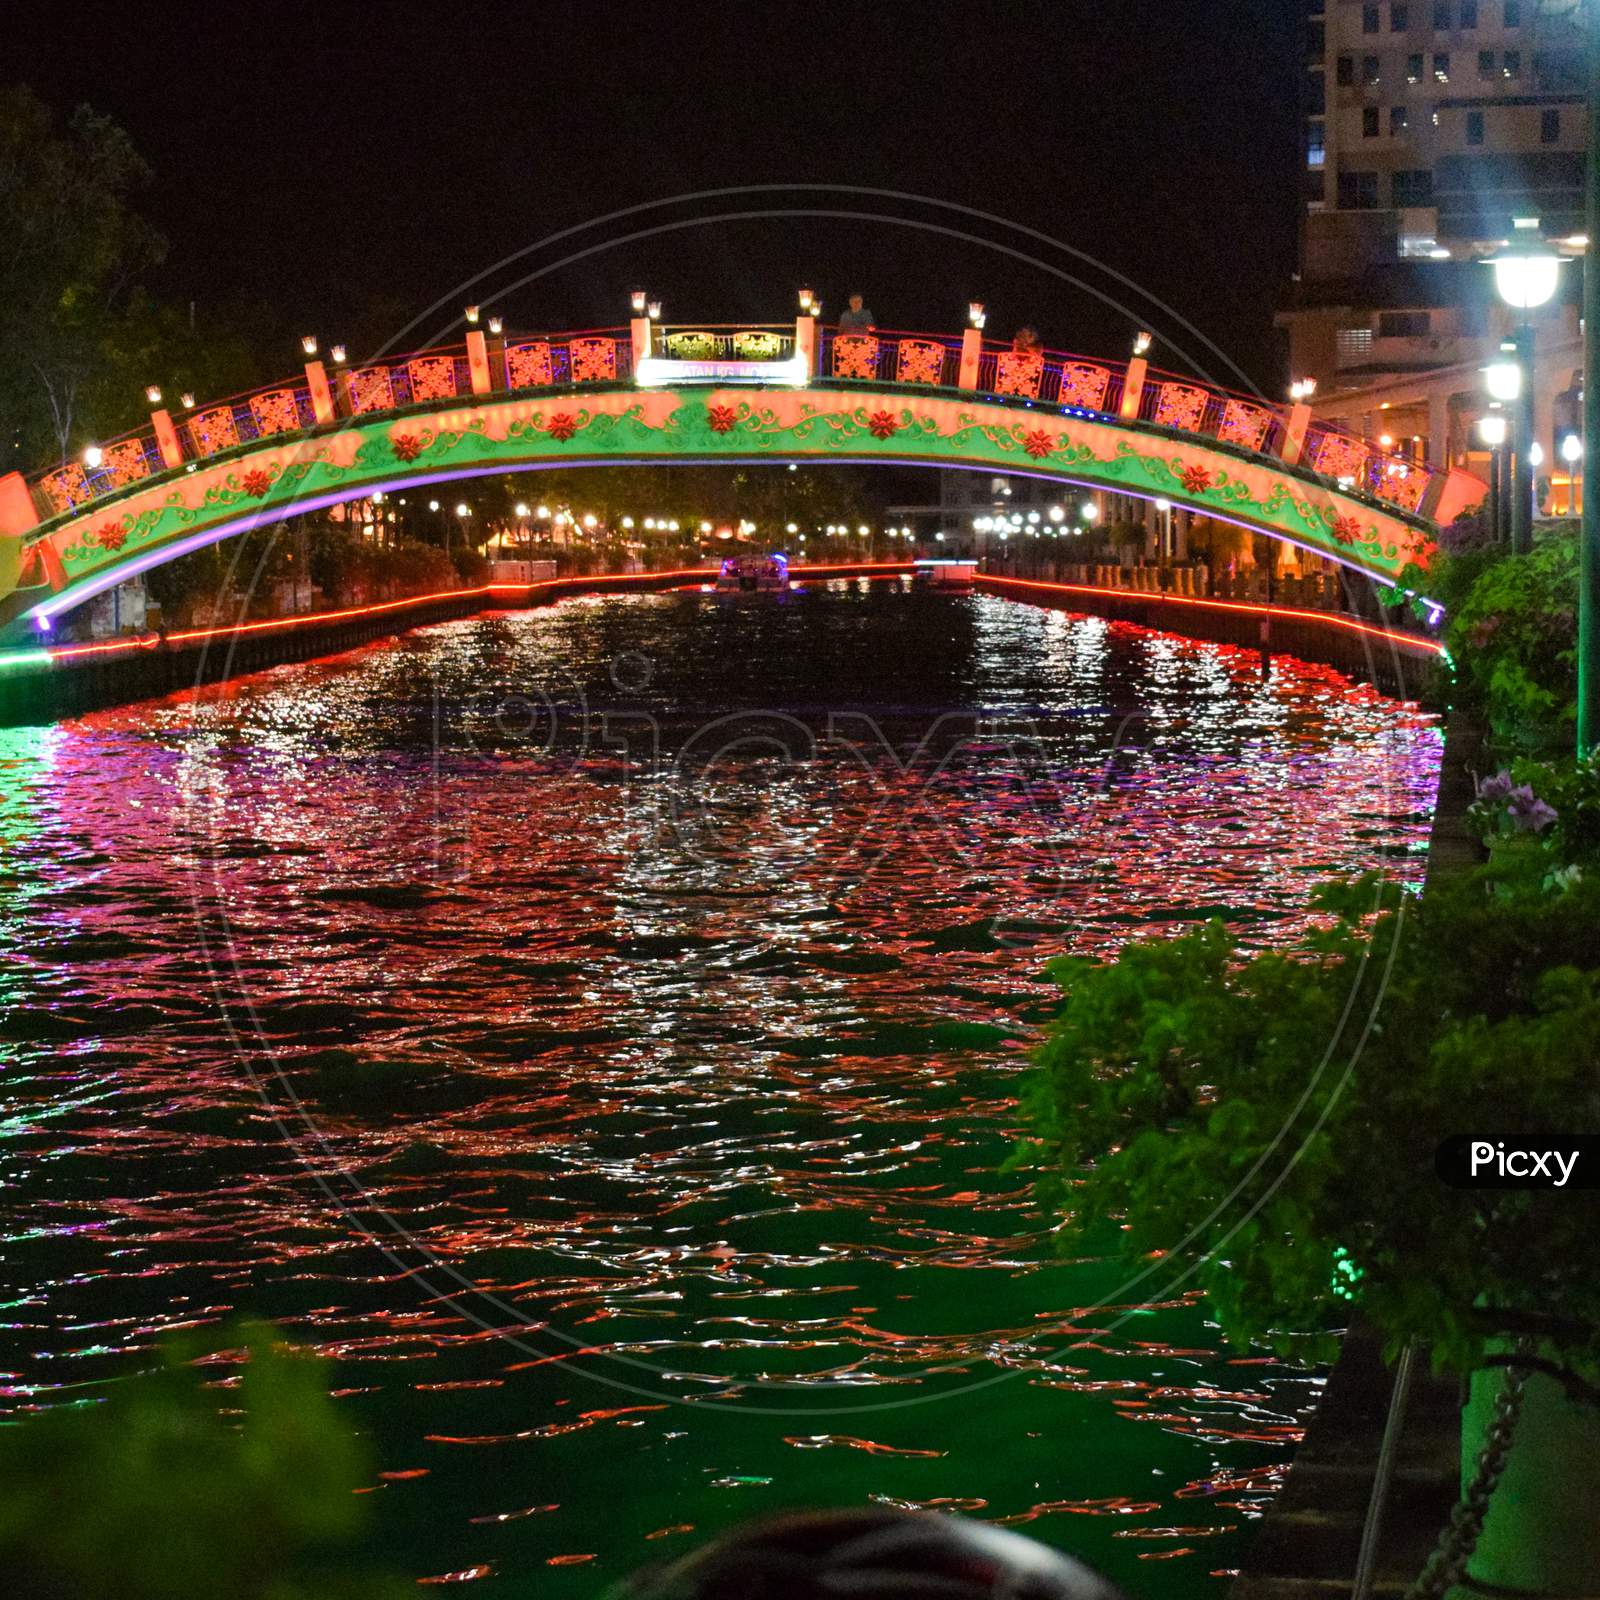 View of Malacca River at night, a popular nightlife spot with bars and music which is beautifully lit up, Night view of the Malacca River in Malacca (Melaka), Malaysia